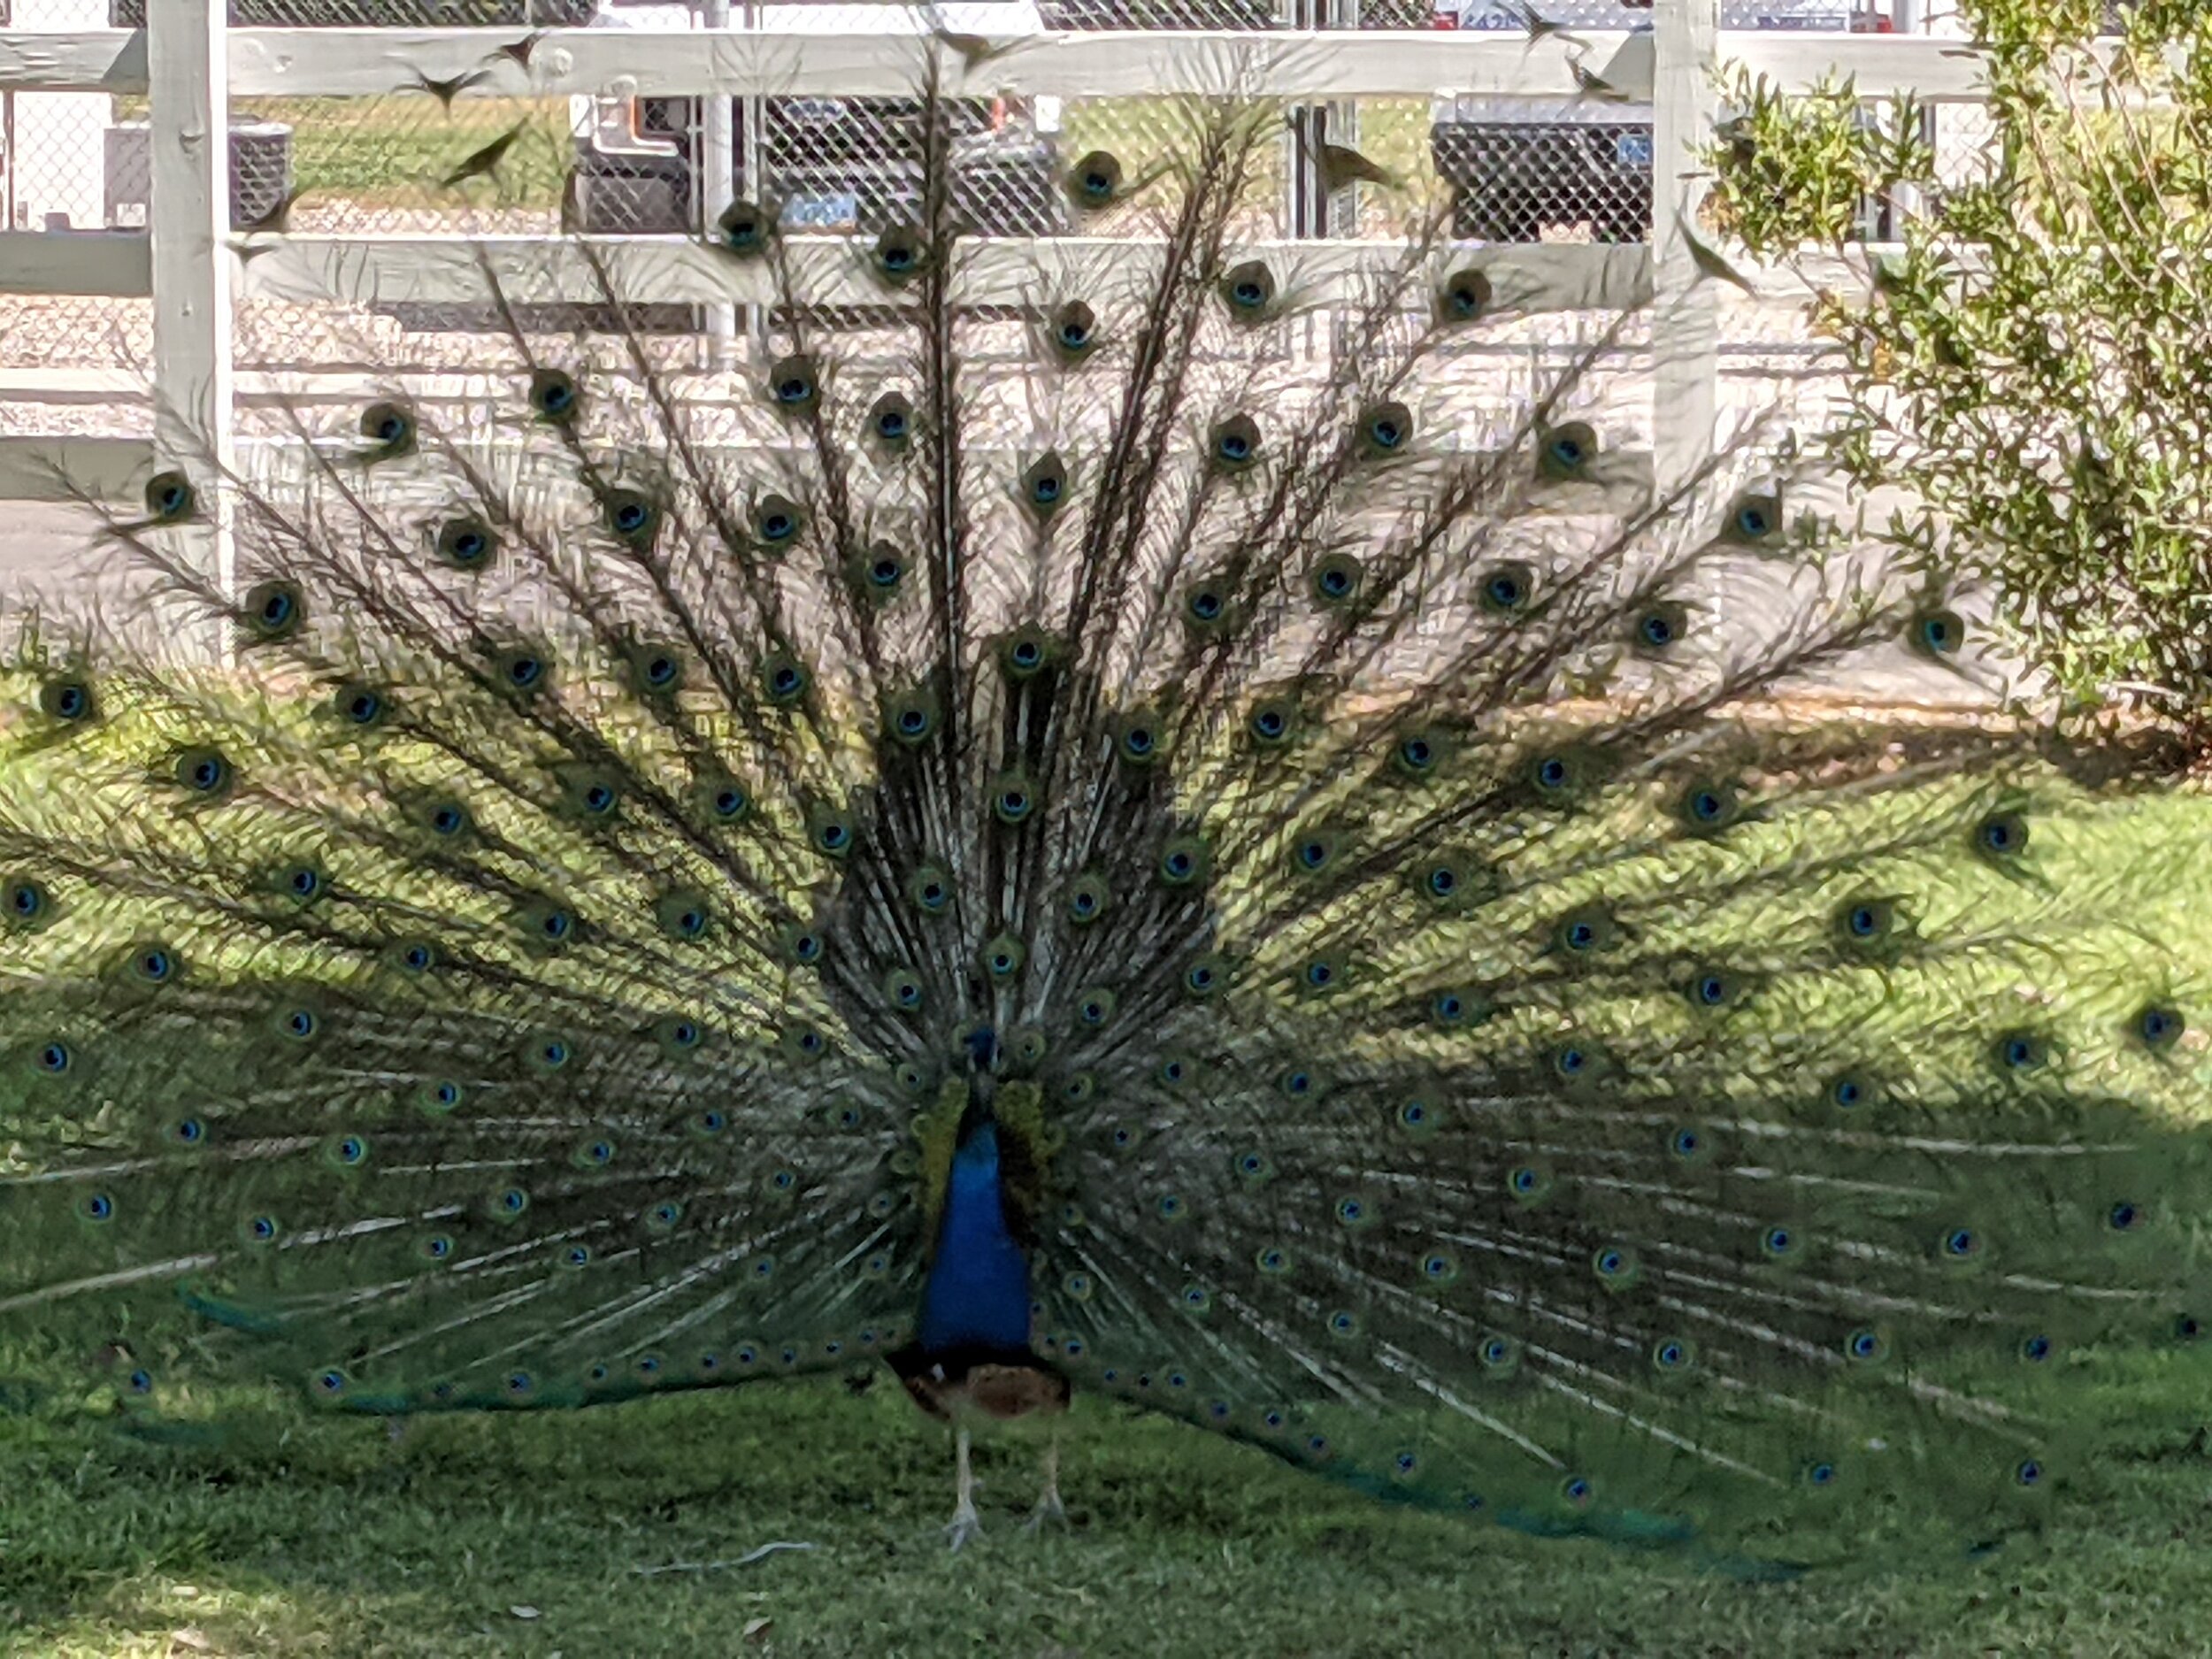 Closeup of Peacock Showing Off